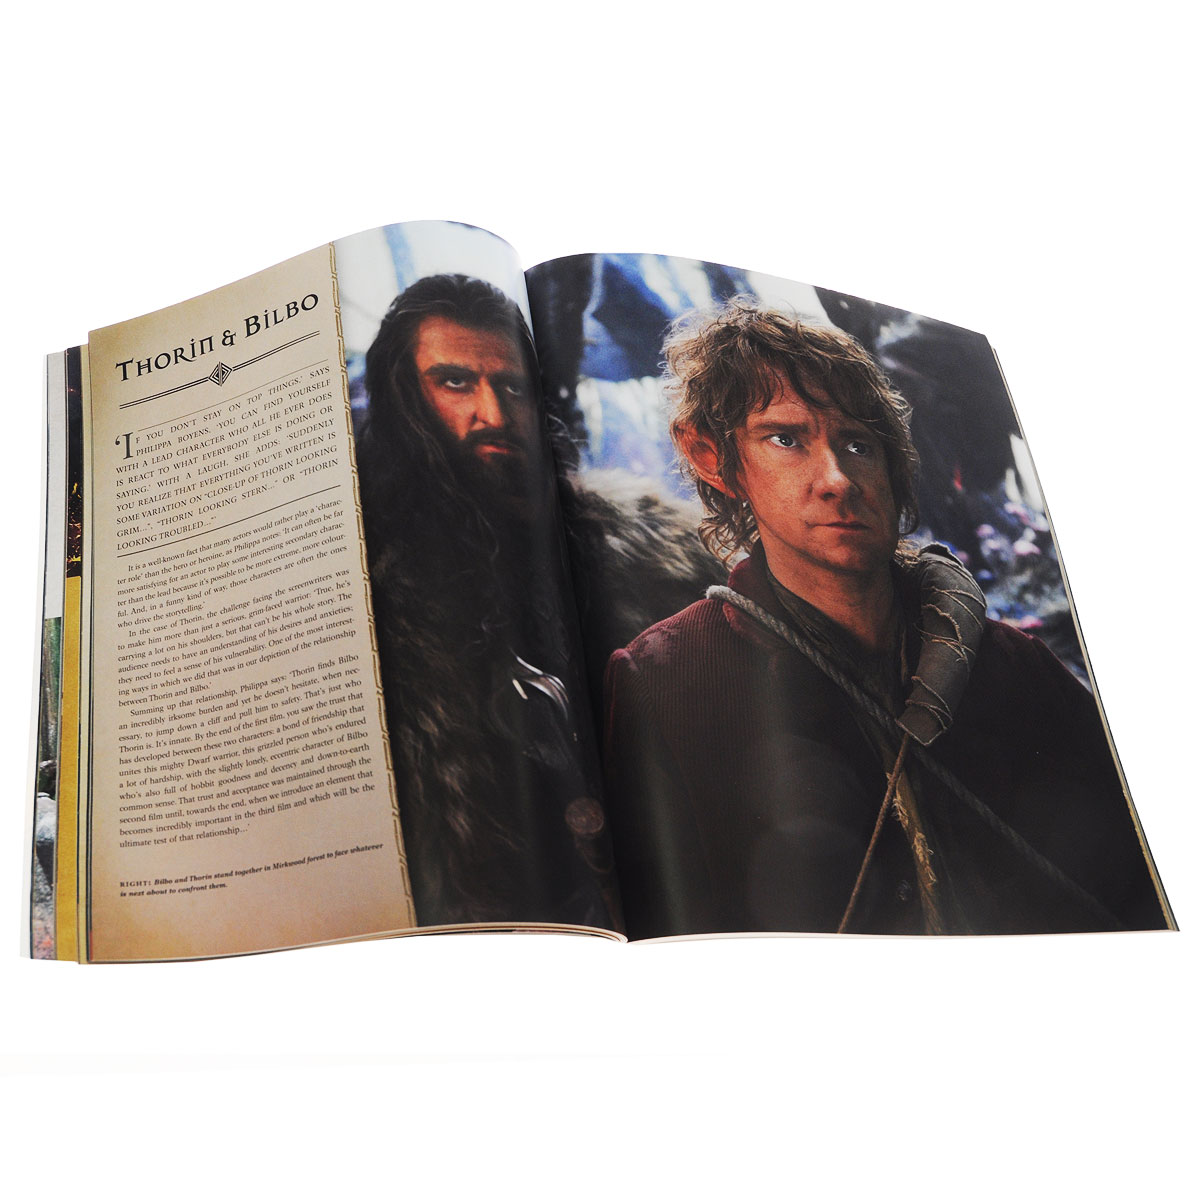 The Hobbit: The Battle of the Five Armies: Official Movie Guide